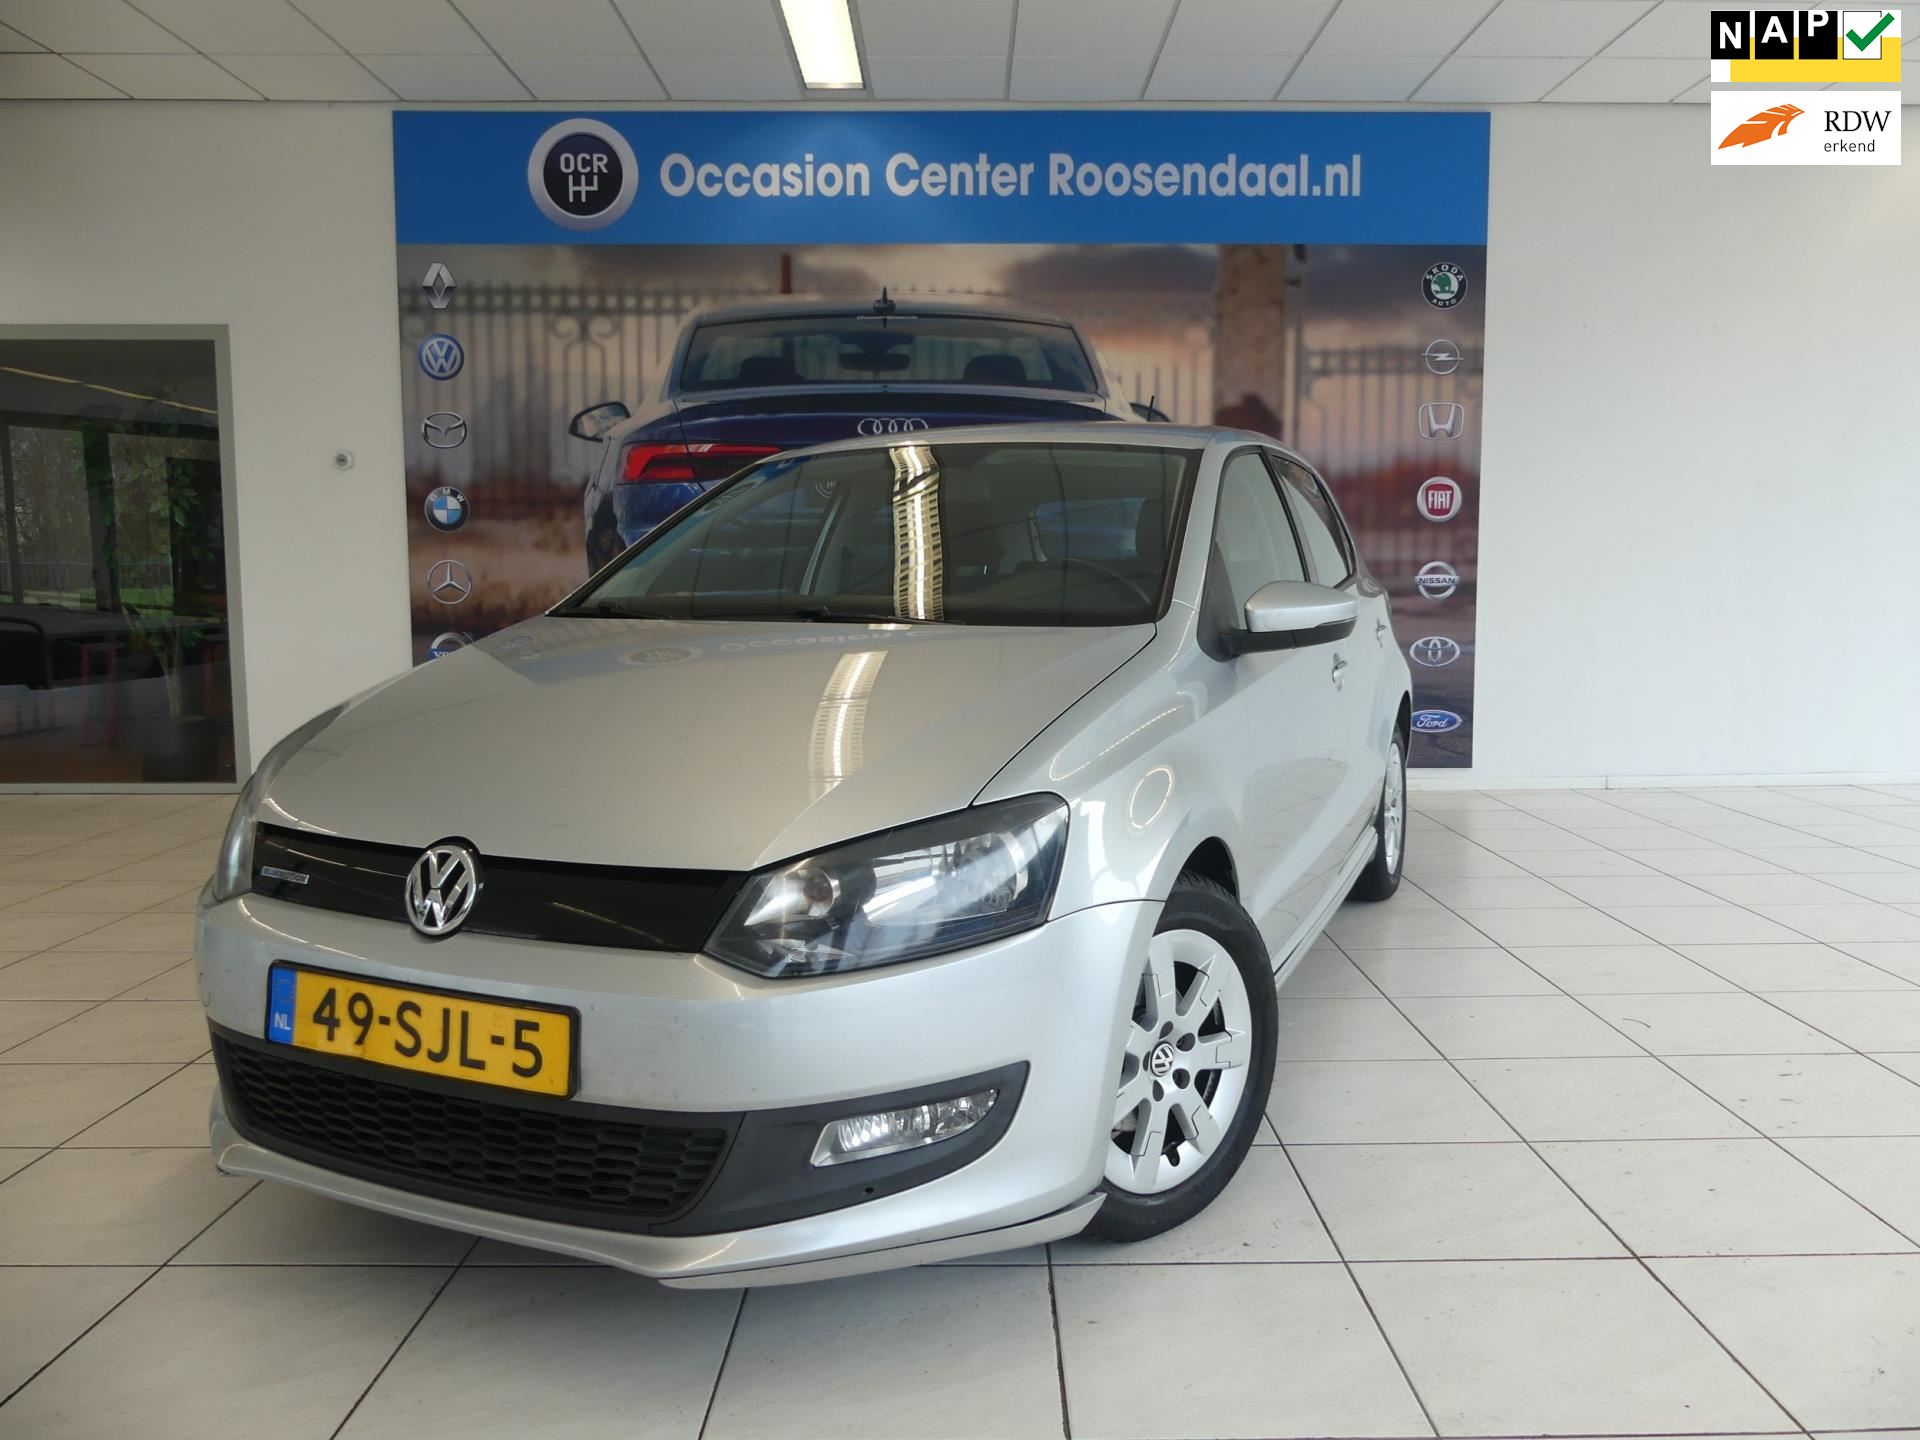 Polo - 1.2 TDI BlueMotion Comfortline Airco Navigatie 5- Drs Cruise Control Diesel uit 2011 - www.occasioncenterroosendaal.nl